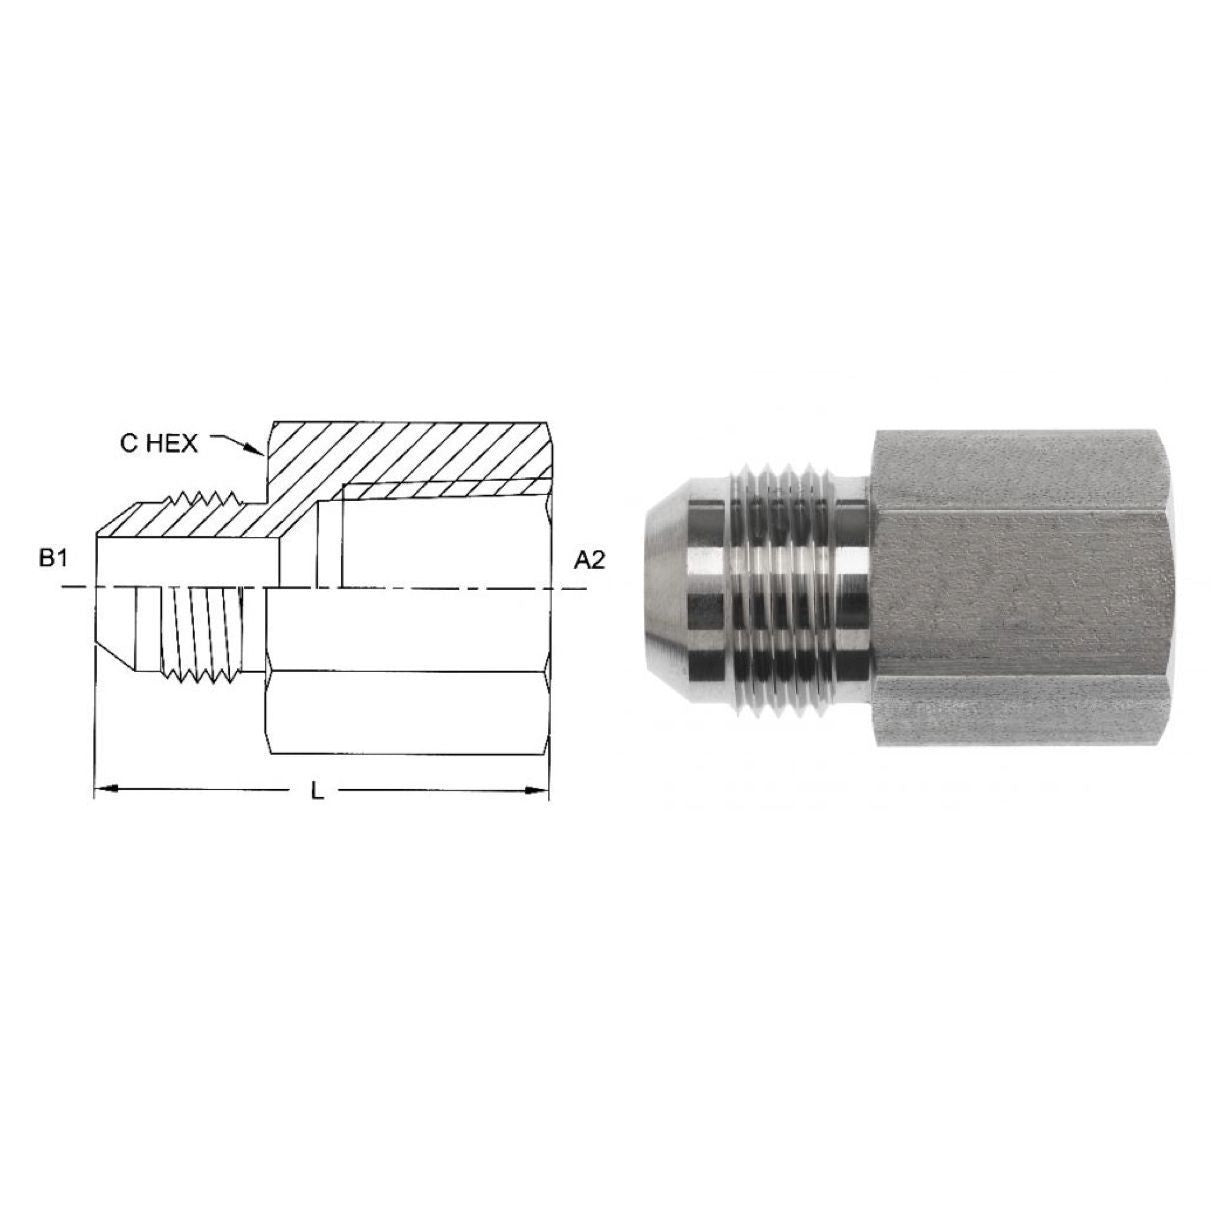 2405-10-06 : OneHydraulics Adapter, Straight, 0.625 (5/8") Male NPT x 0.375 (3/8") Female, Steel, 5000psi